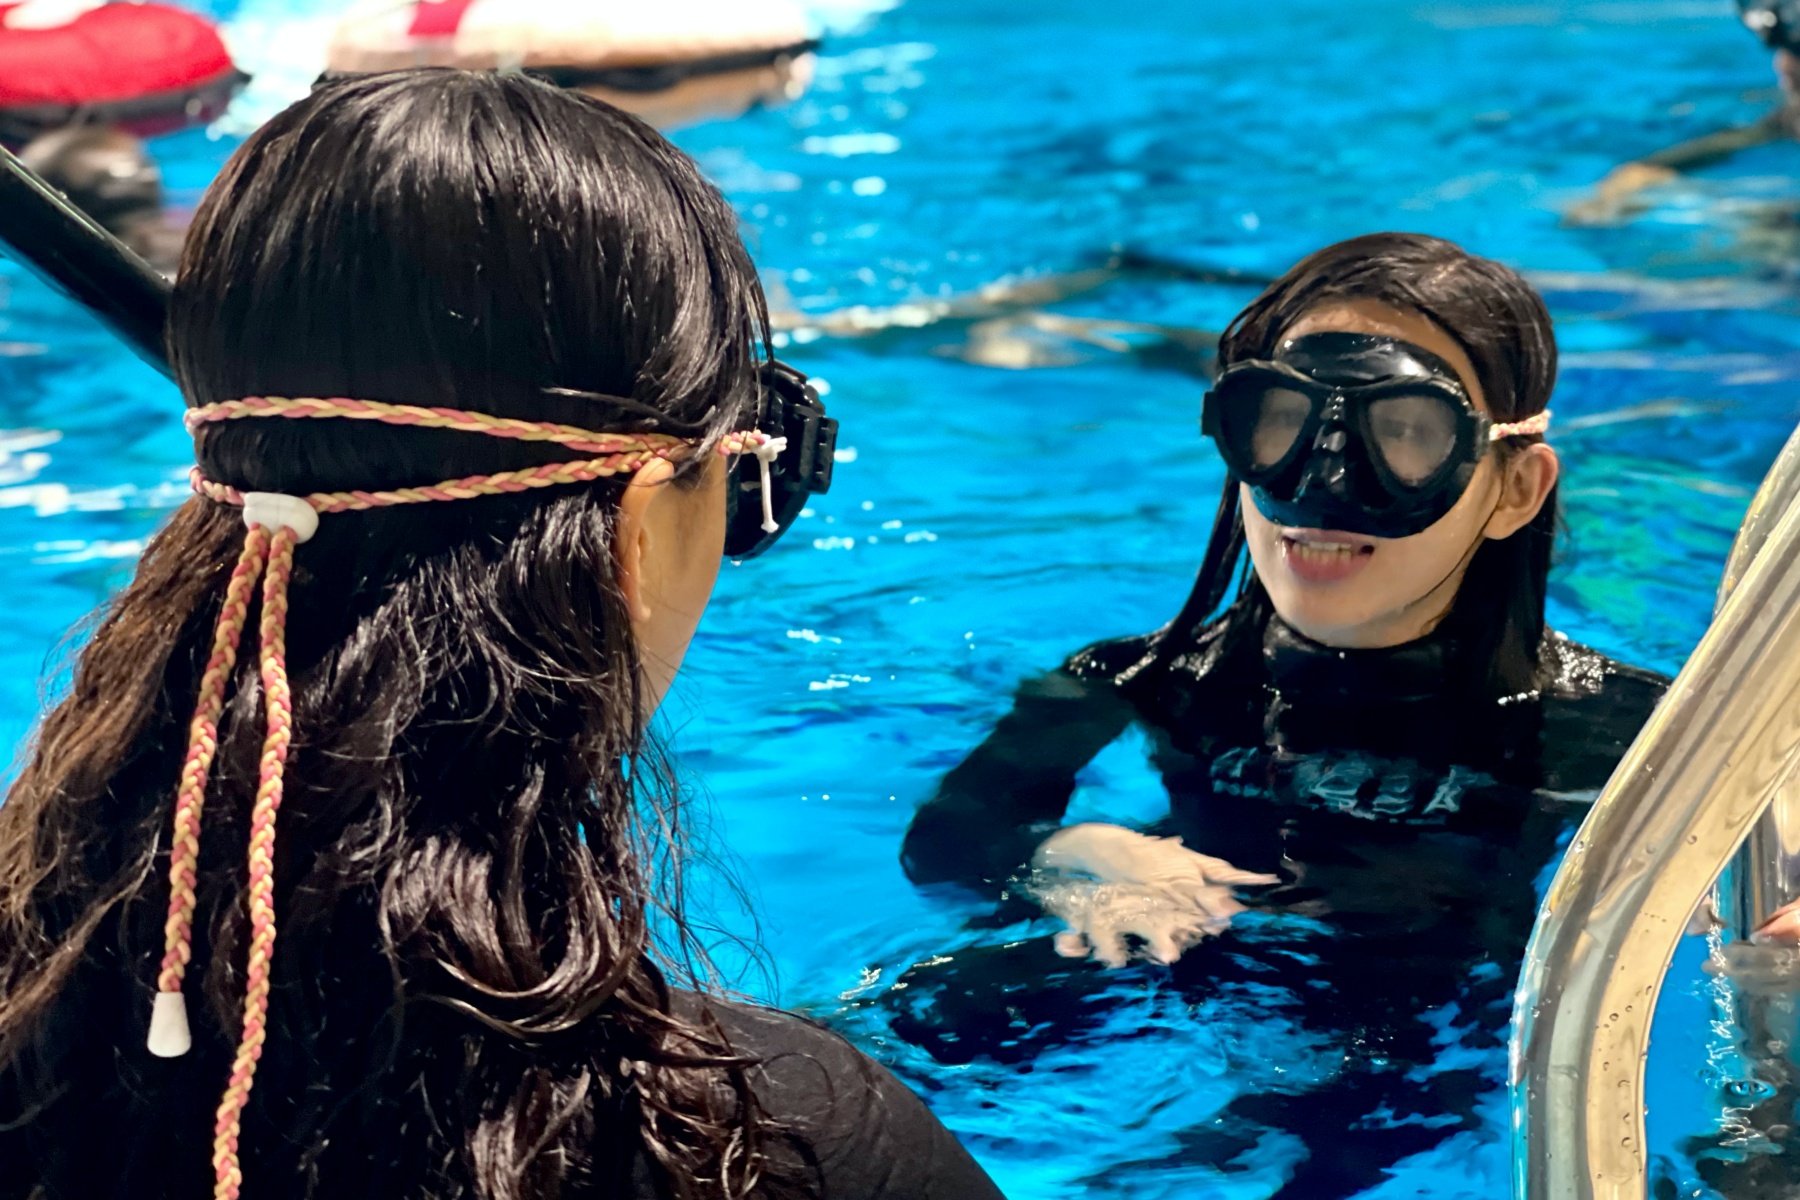 [Heyhey Dive Review] Super Chill Taichung Self Diving Studio, group training and diving trips make free diving a daily routine 24